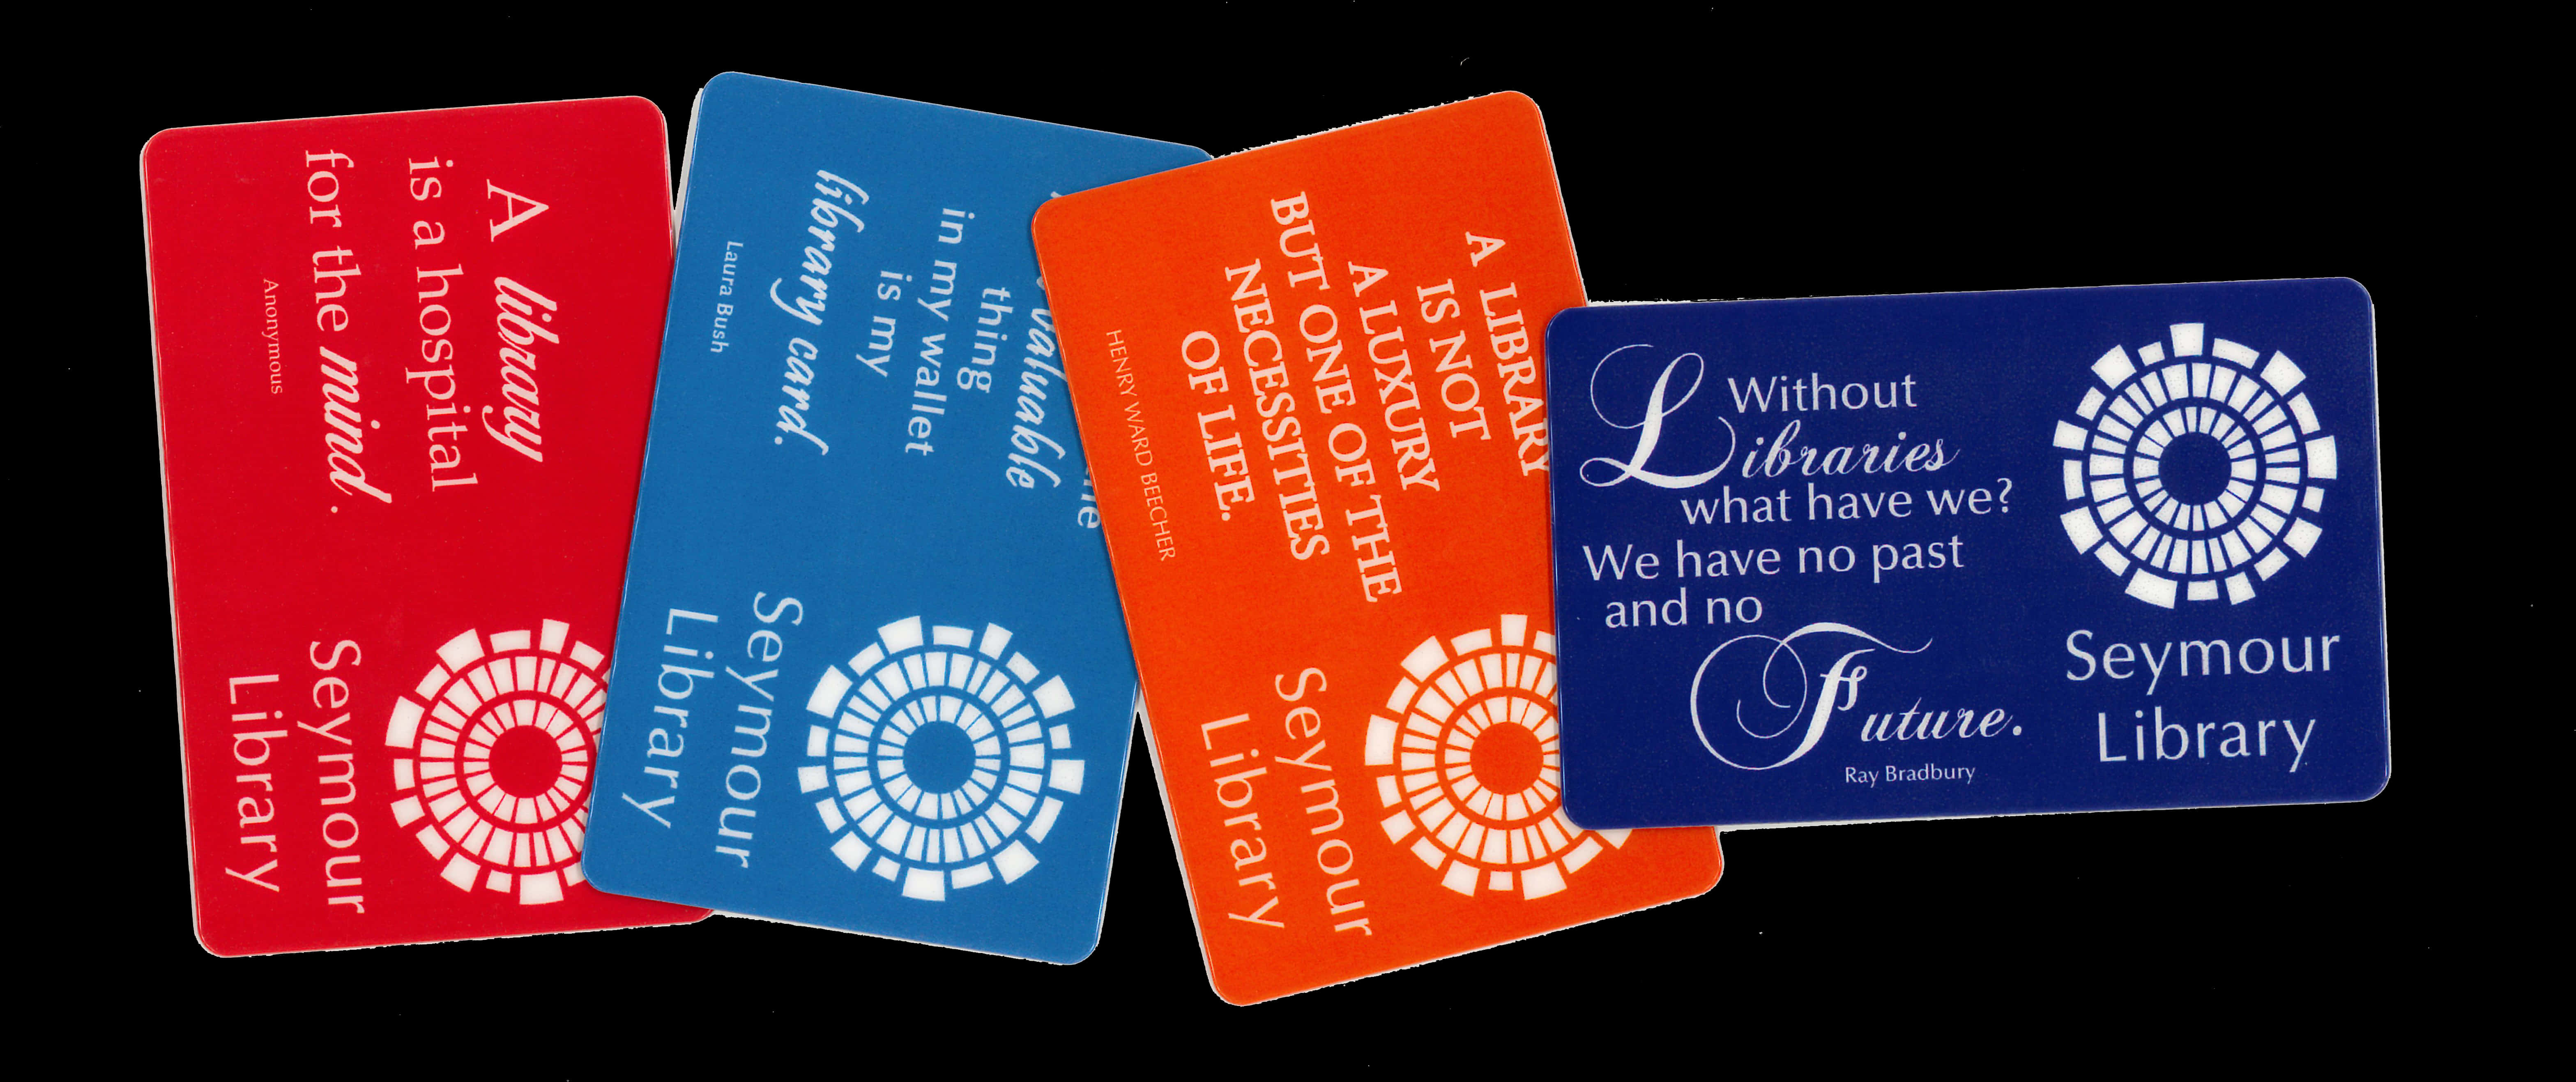 Seymour Library Card Designs PNG image